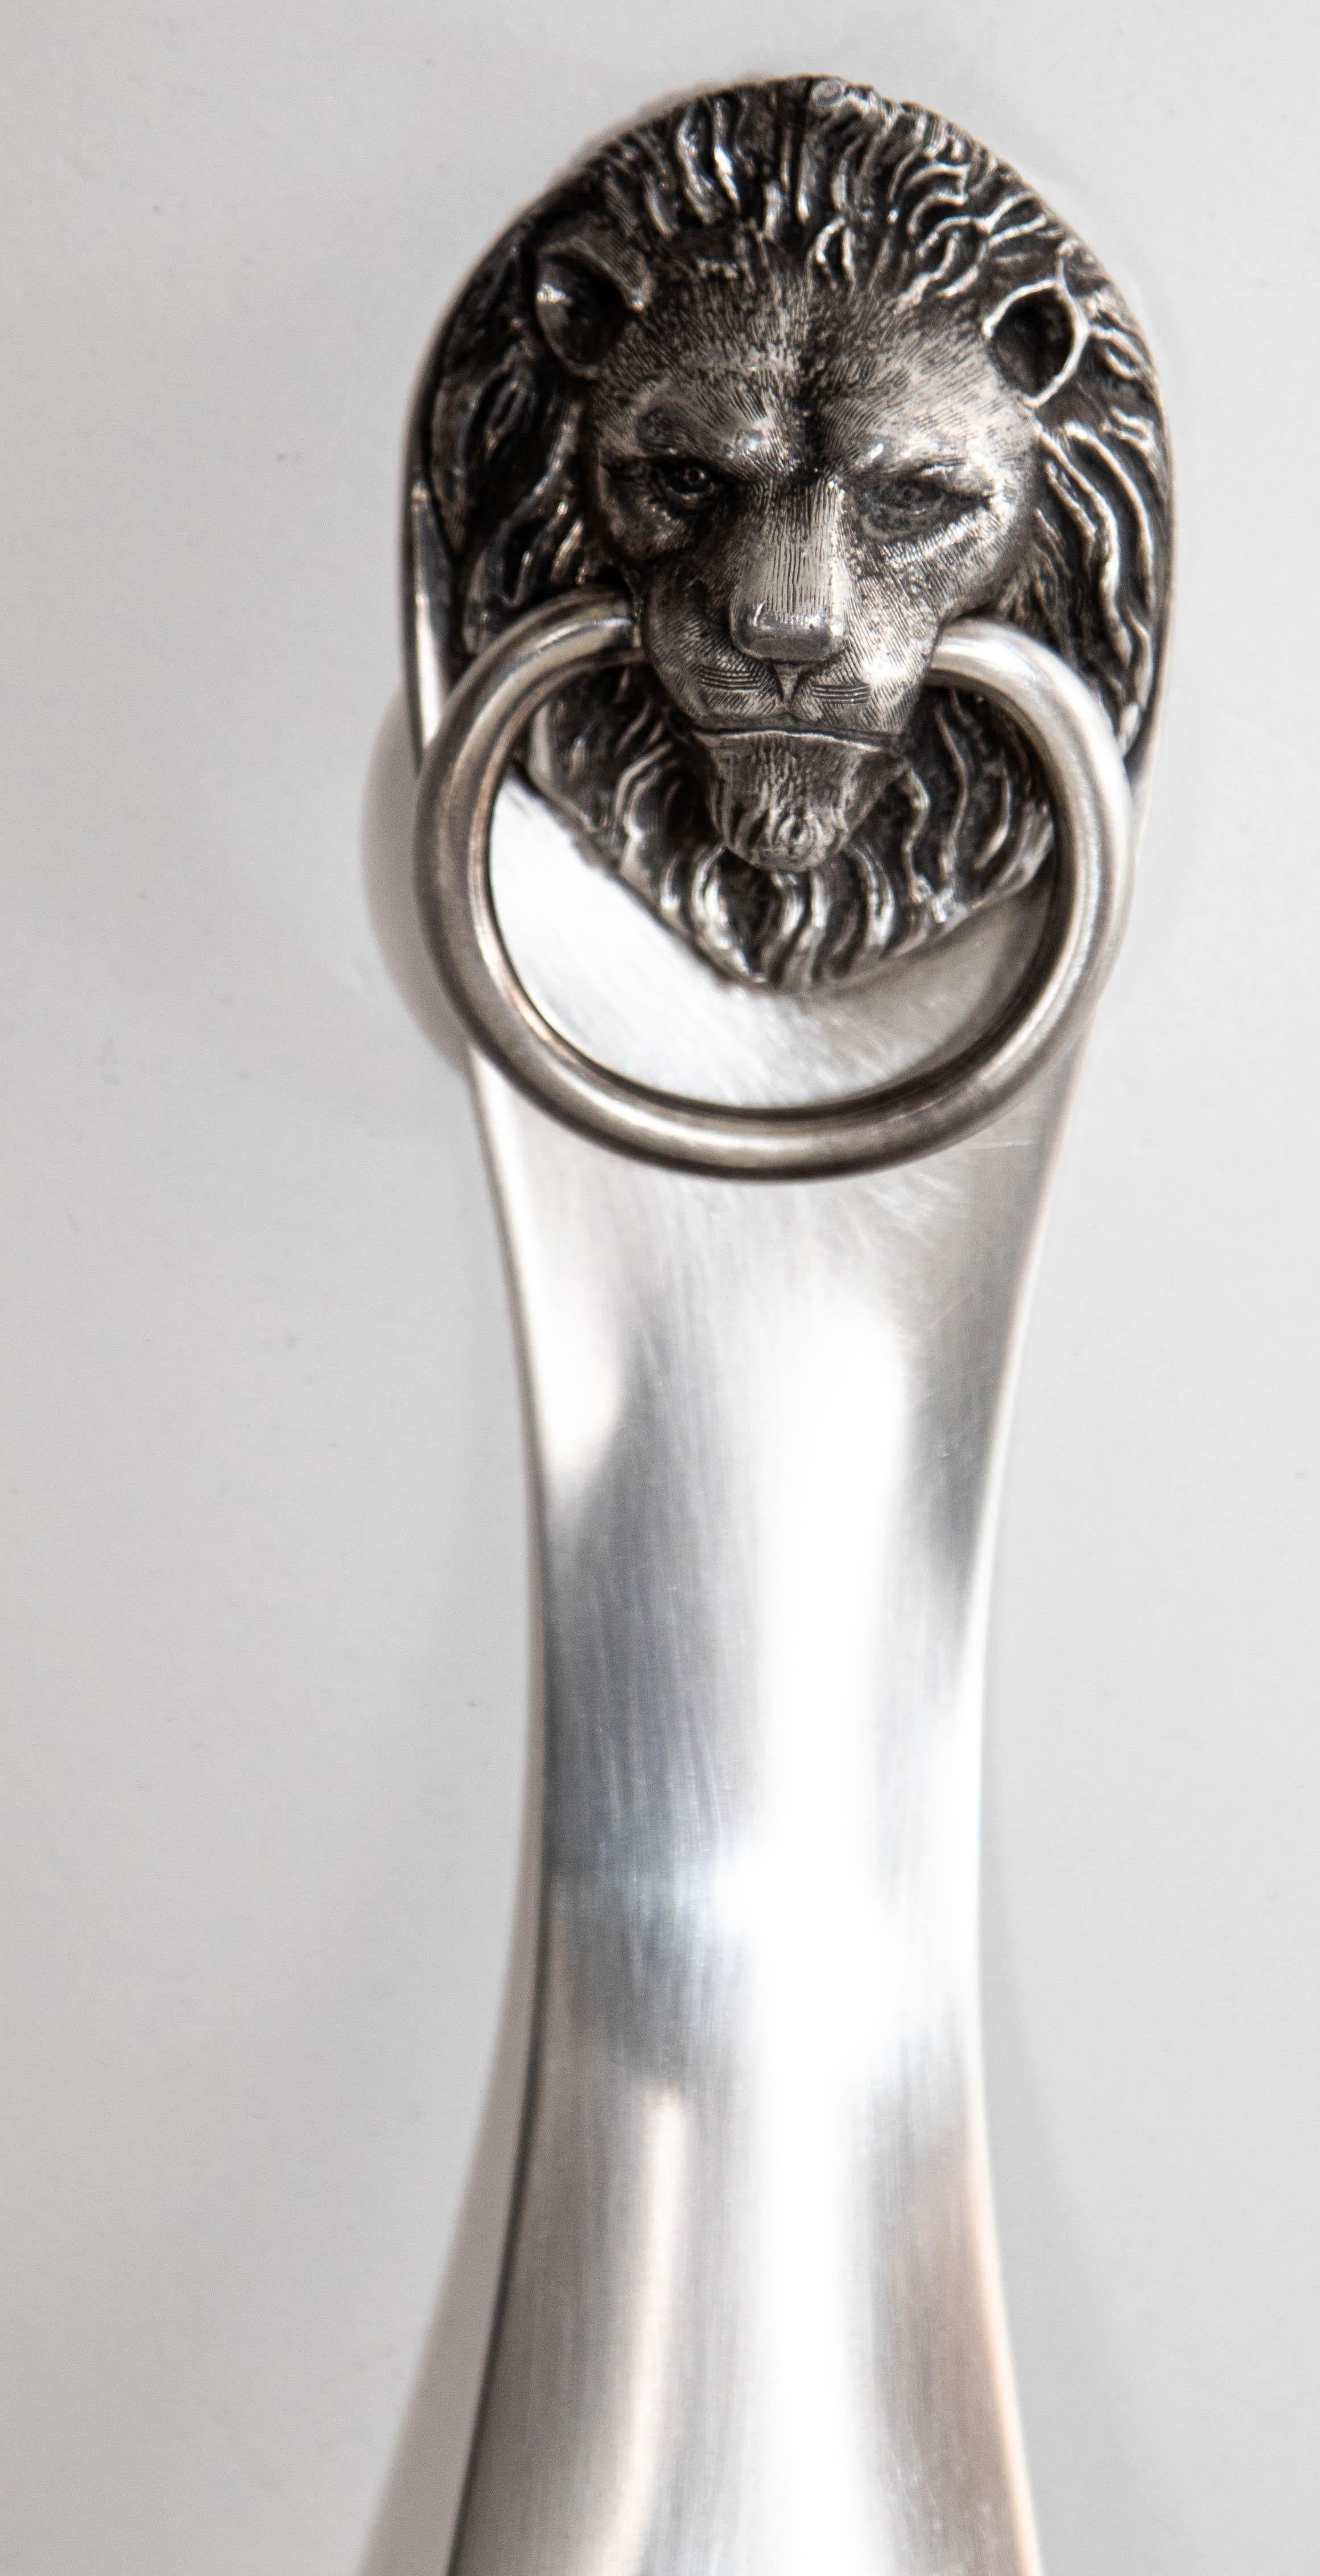 Antique 1950s Reed & Barton Silver Plated Shoe Horn with Lion head and Ring Handle.
Beautiful Reed & Barton heavy Lion head with ring in his mouth.
This cool shoe horn by Reed and Barton is finely made in polished silver plate featuring a lion mask